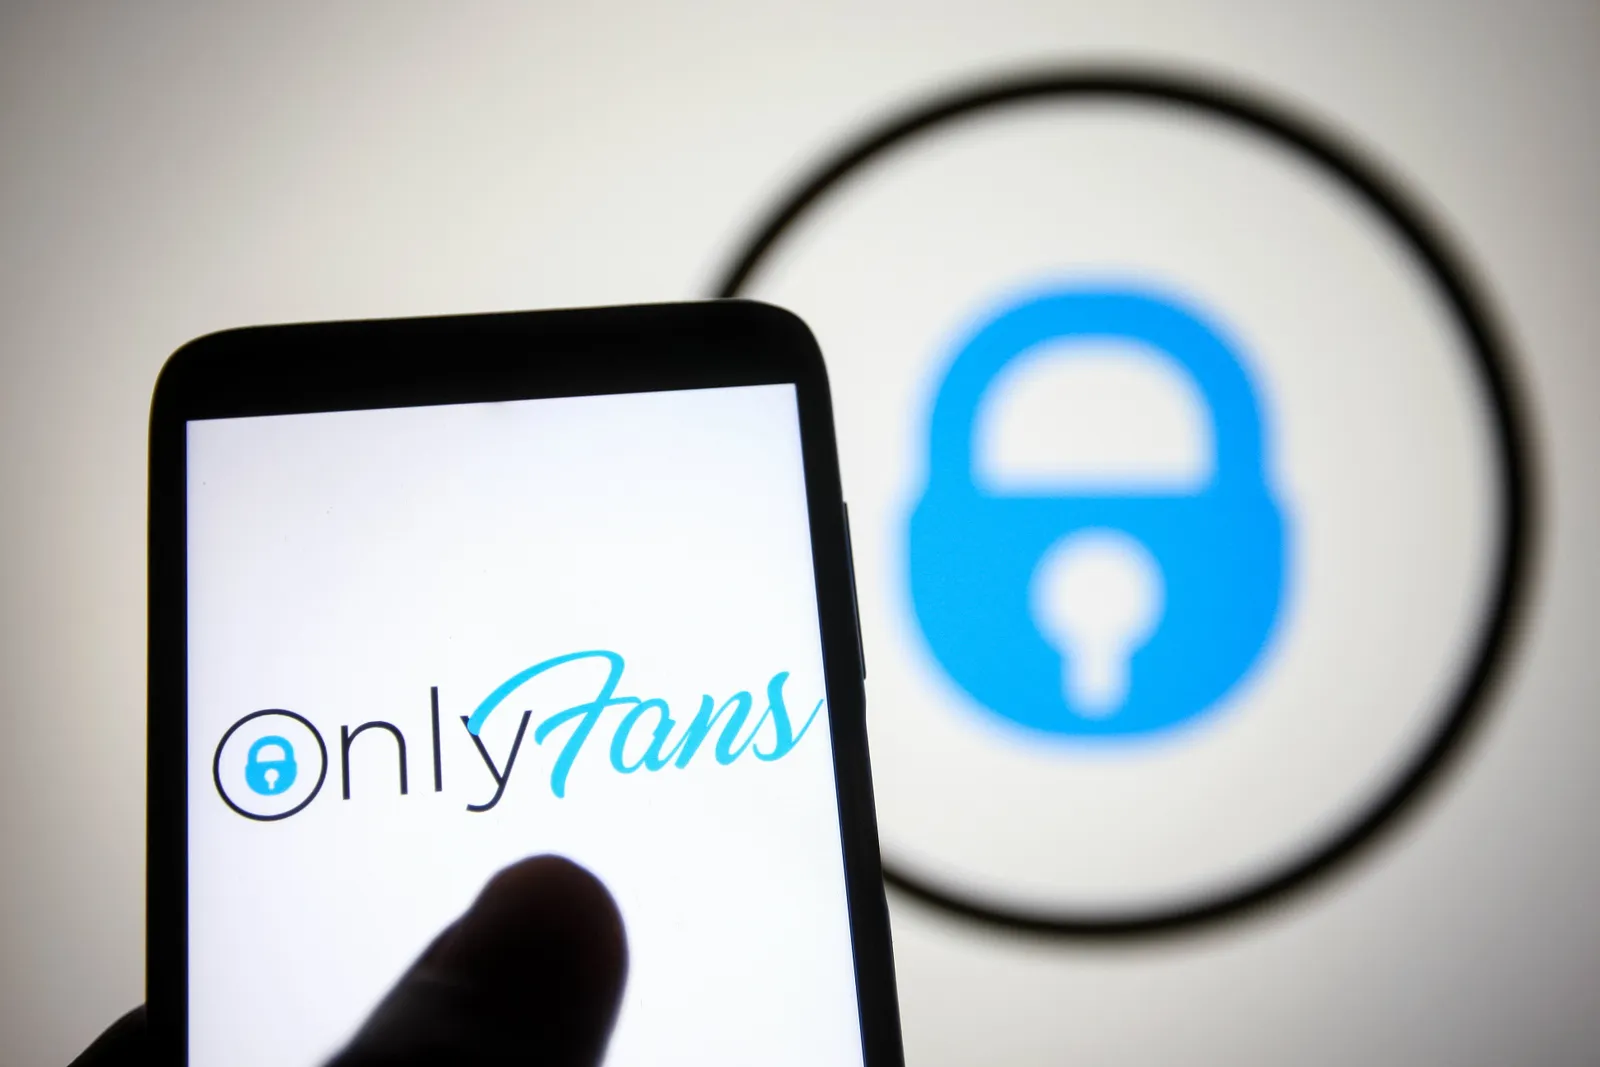 With a dedicated Nfl-based Onlyfans group, you can show your support f